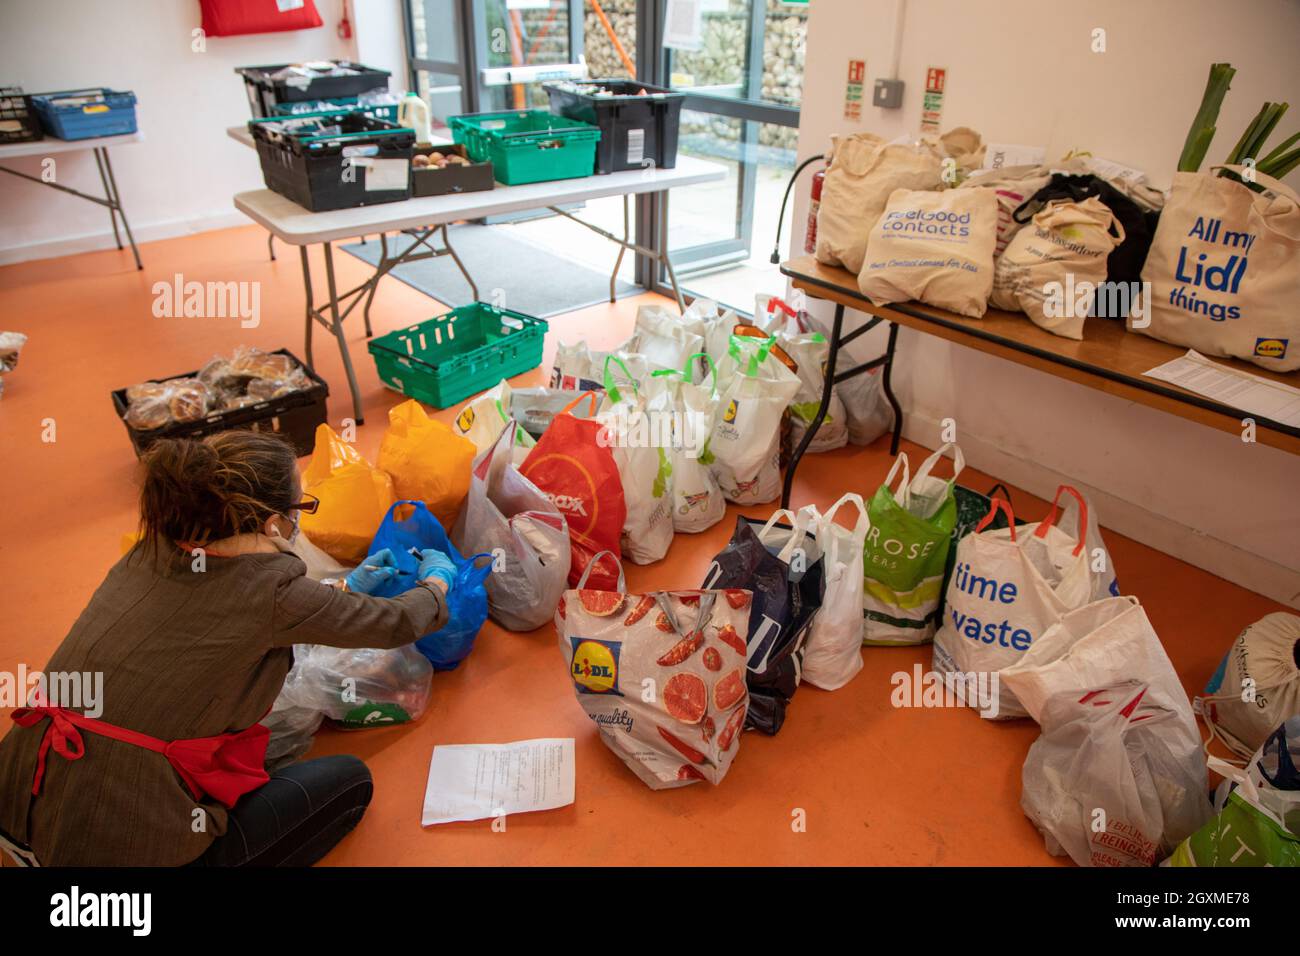 A woman volunteer at a food bank sorting bags  of donated food in preparation for distributing to members of the local community in need.  They are at Stock Photo